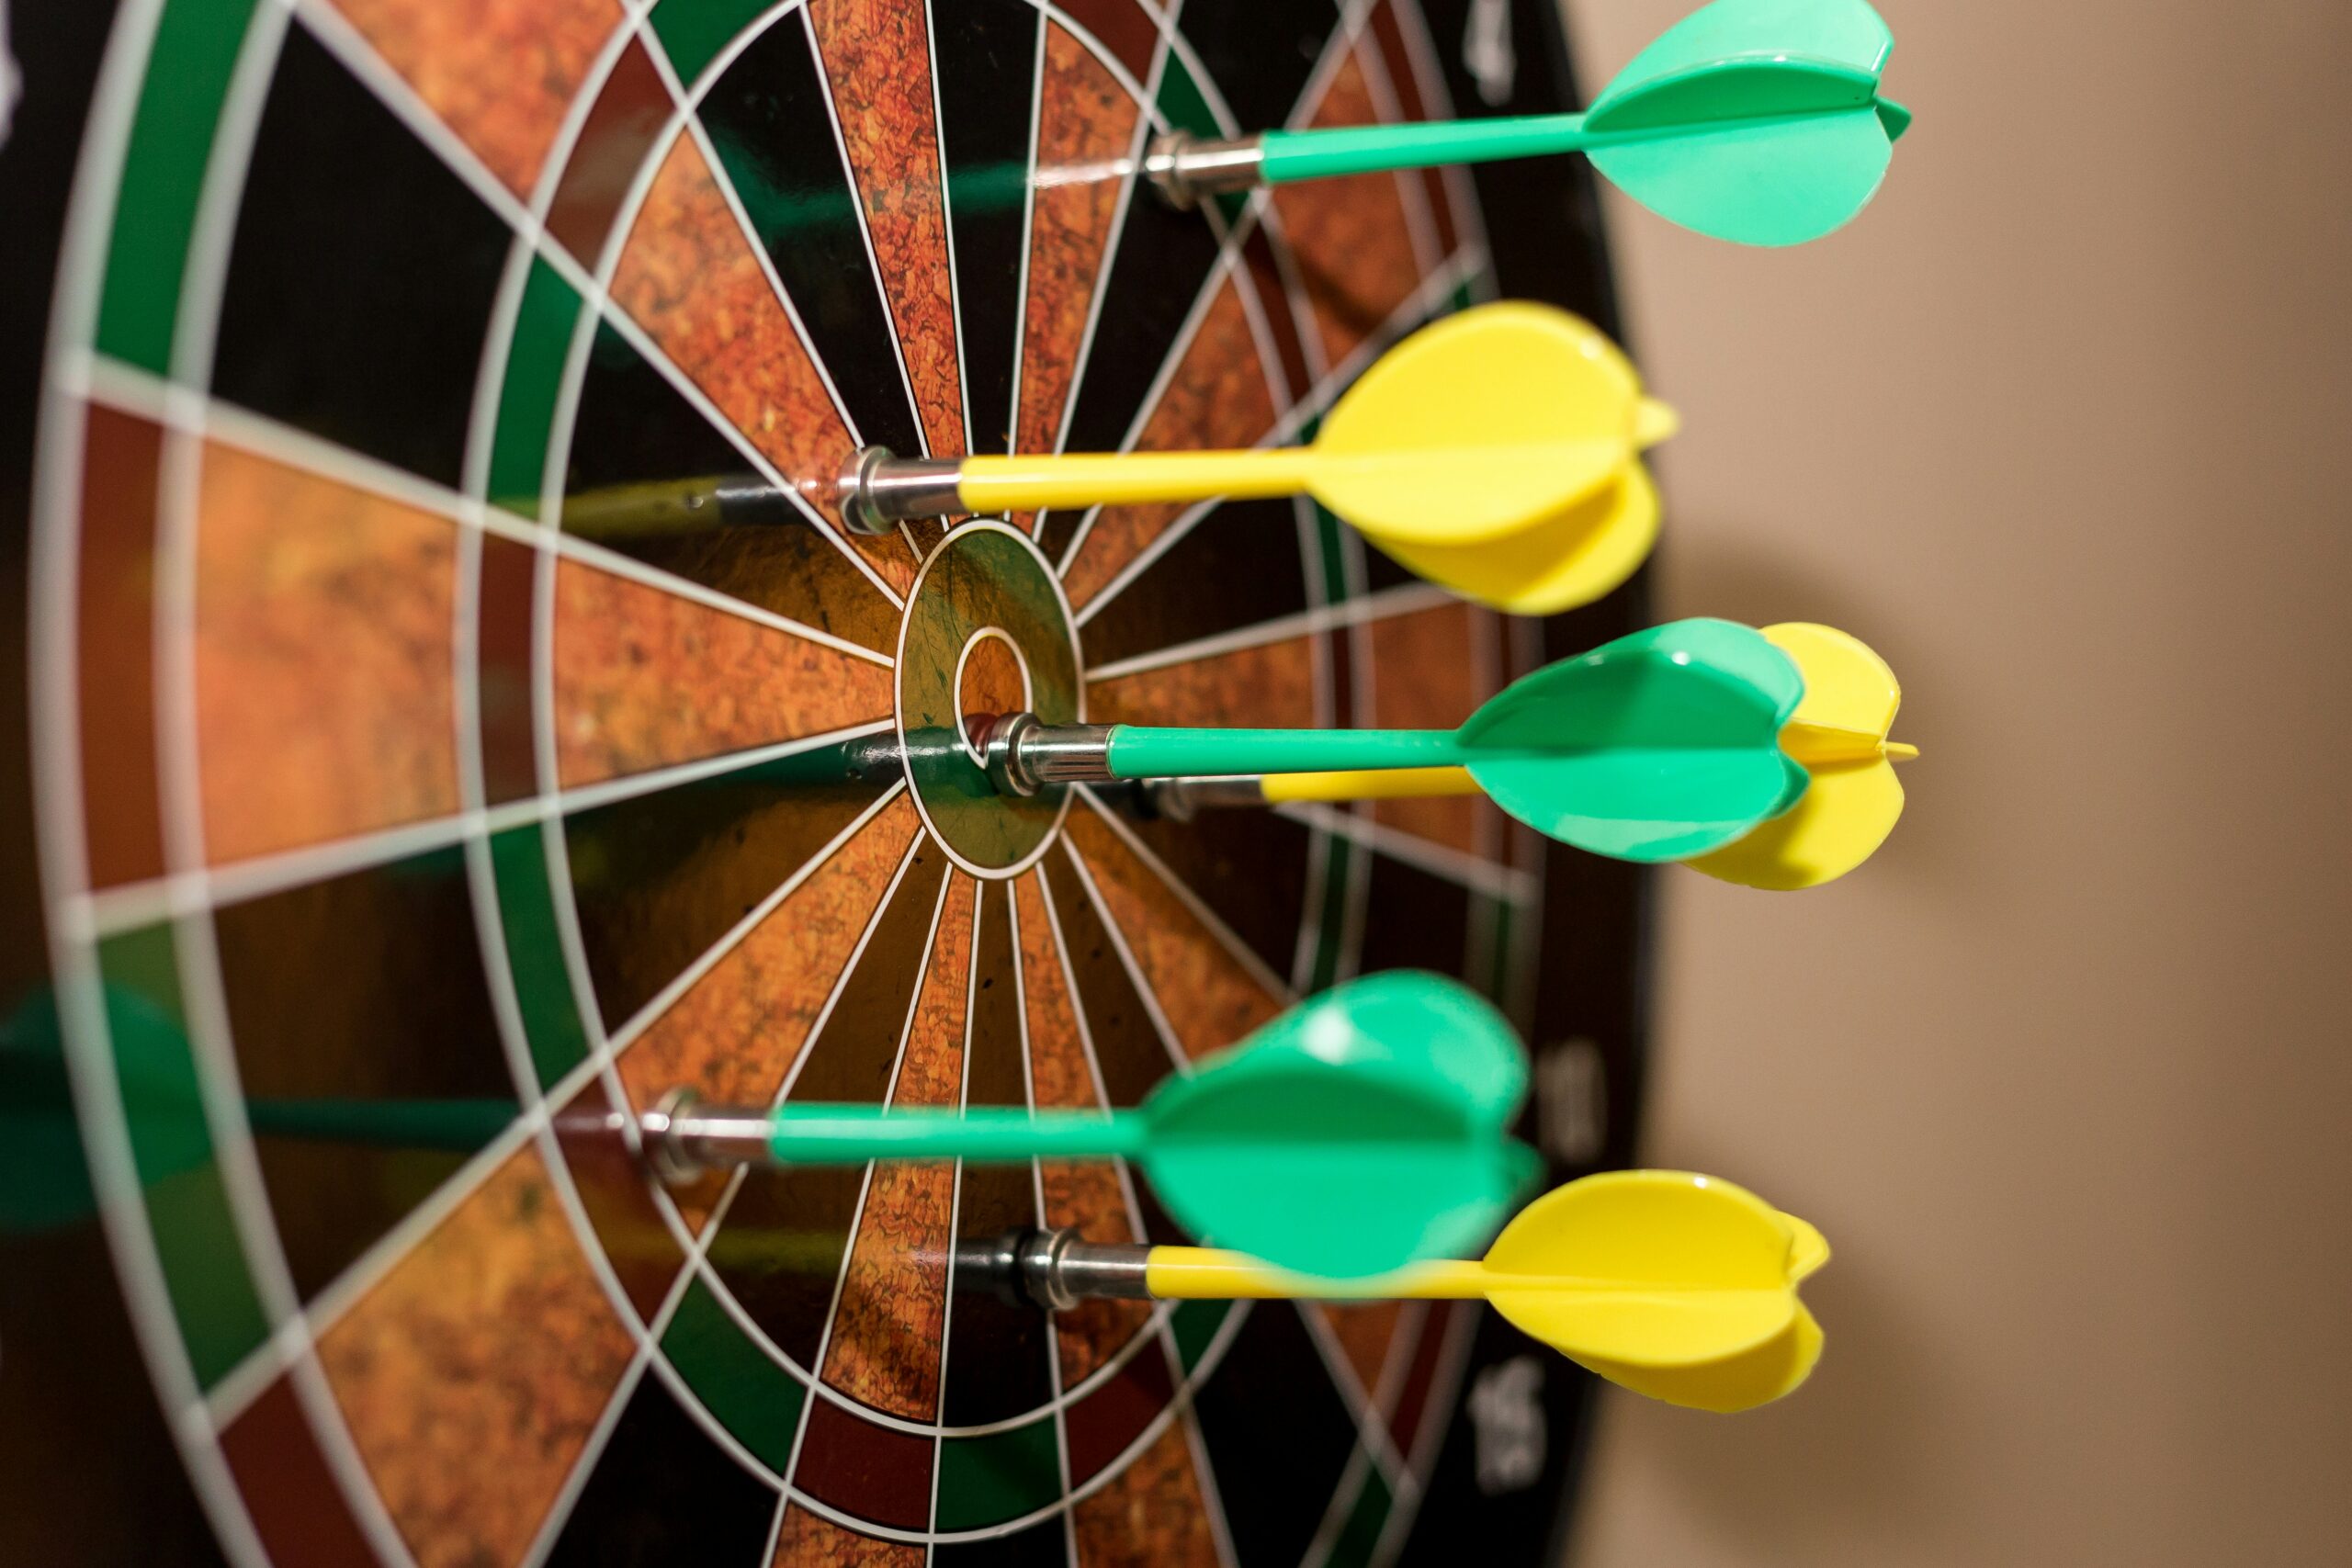 Goal setting is like aiming for a bullseye. You know when you succeed.